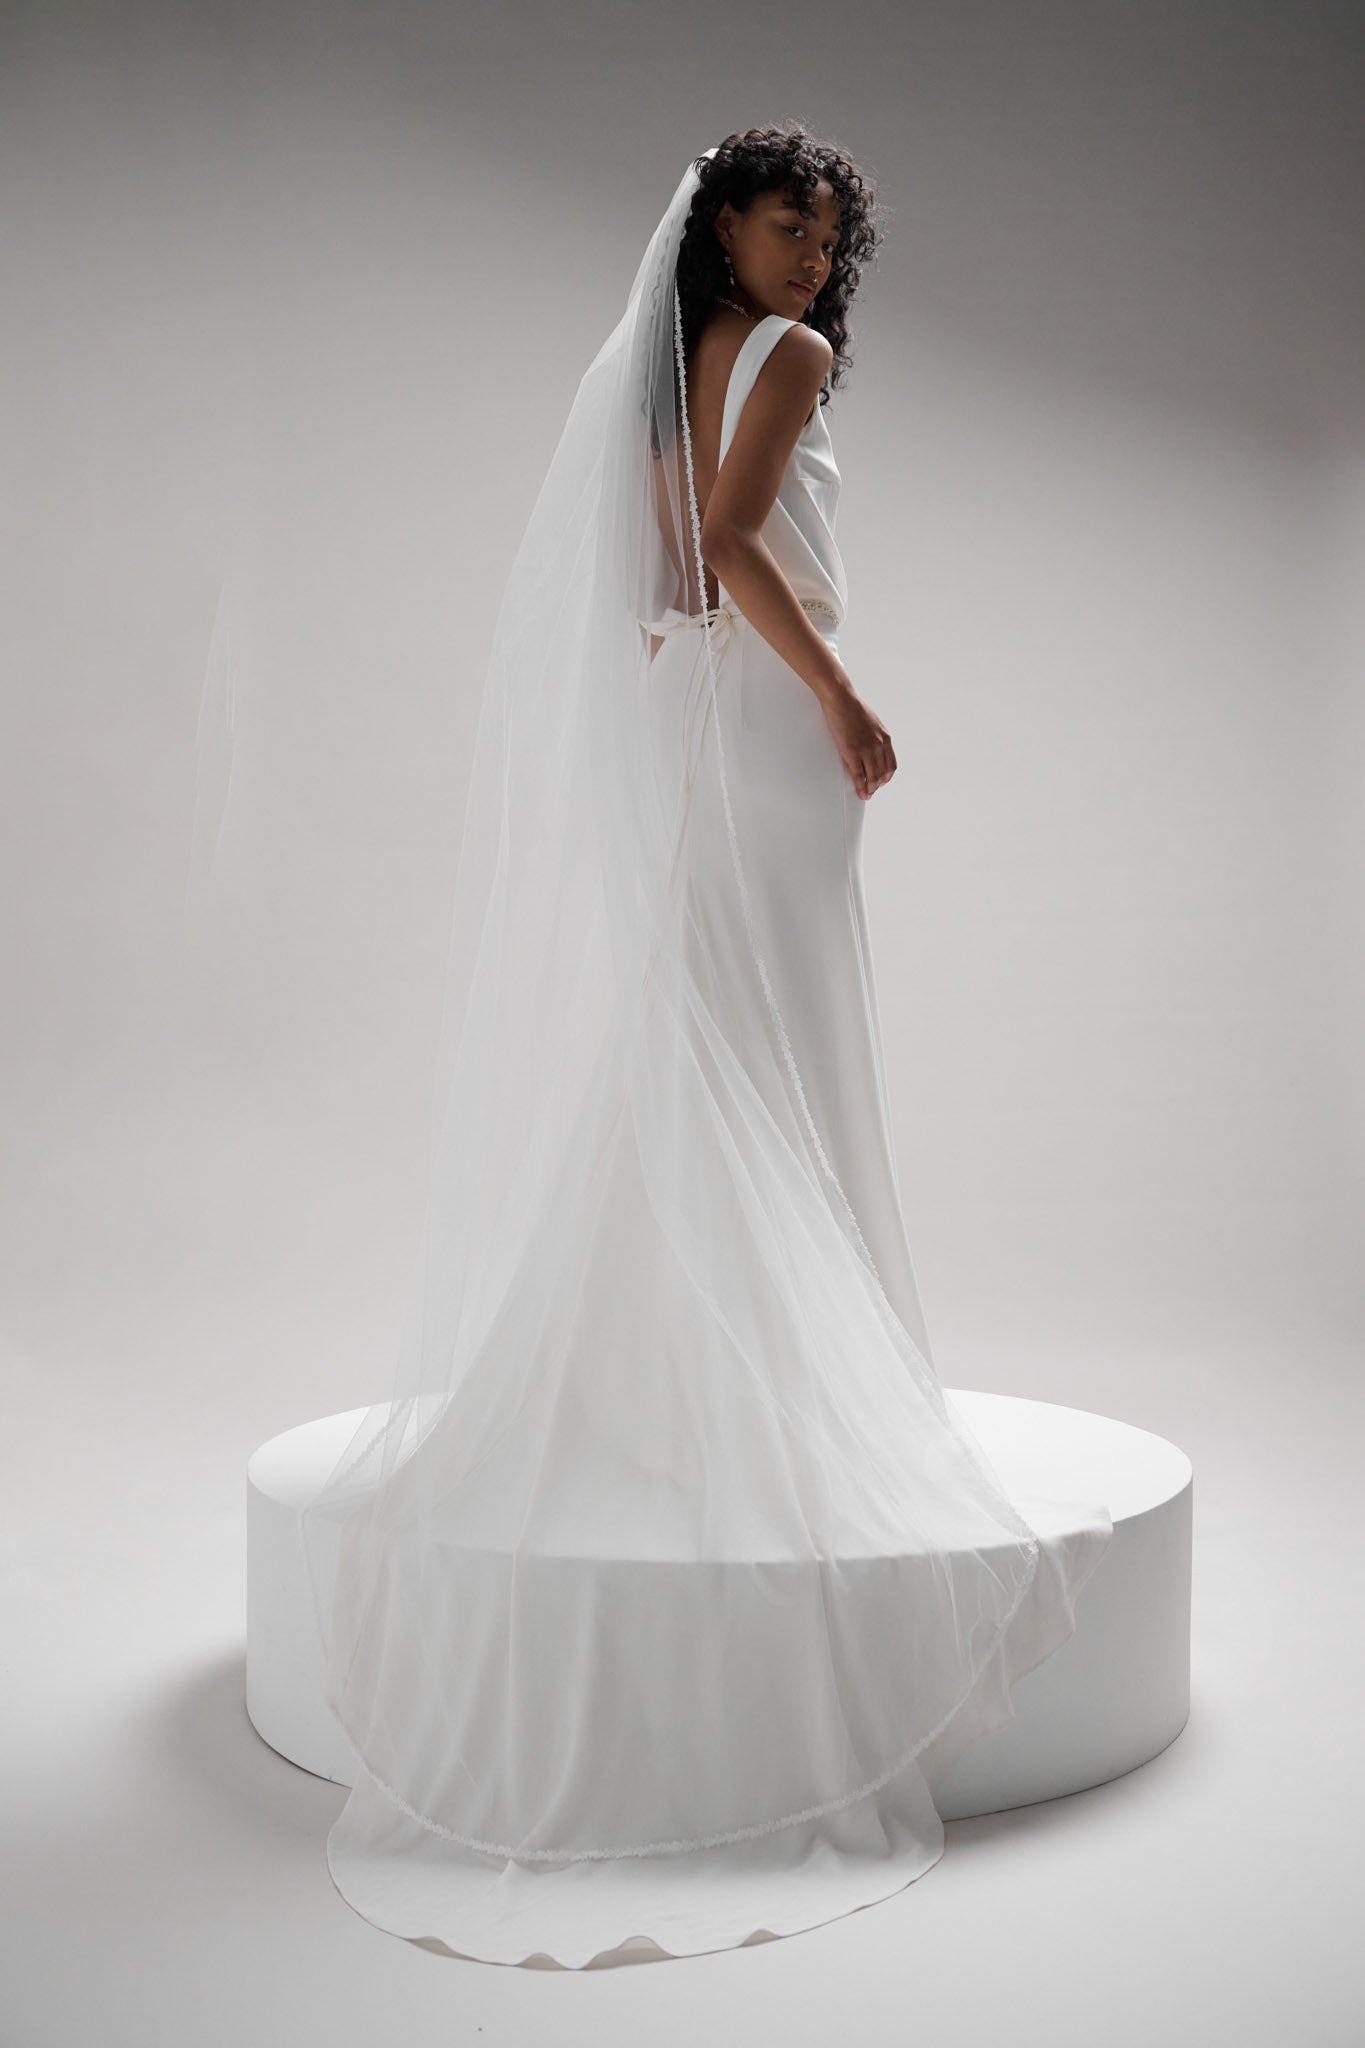 Floral lace trimmed veil with soft tulle base that drapes beautifully and appears to float in the wind.